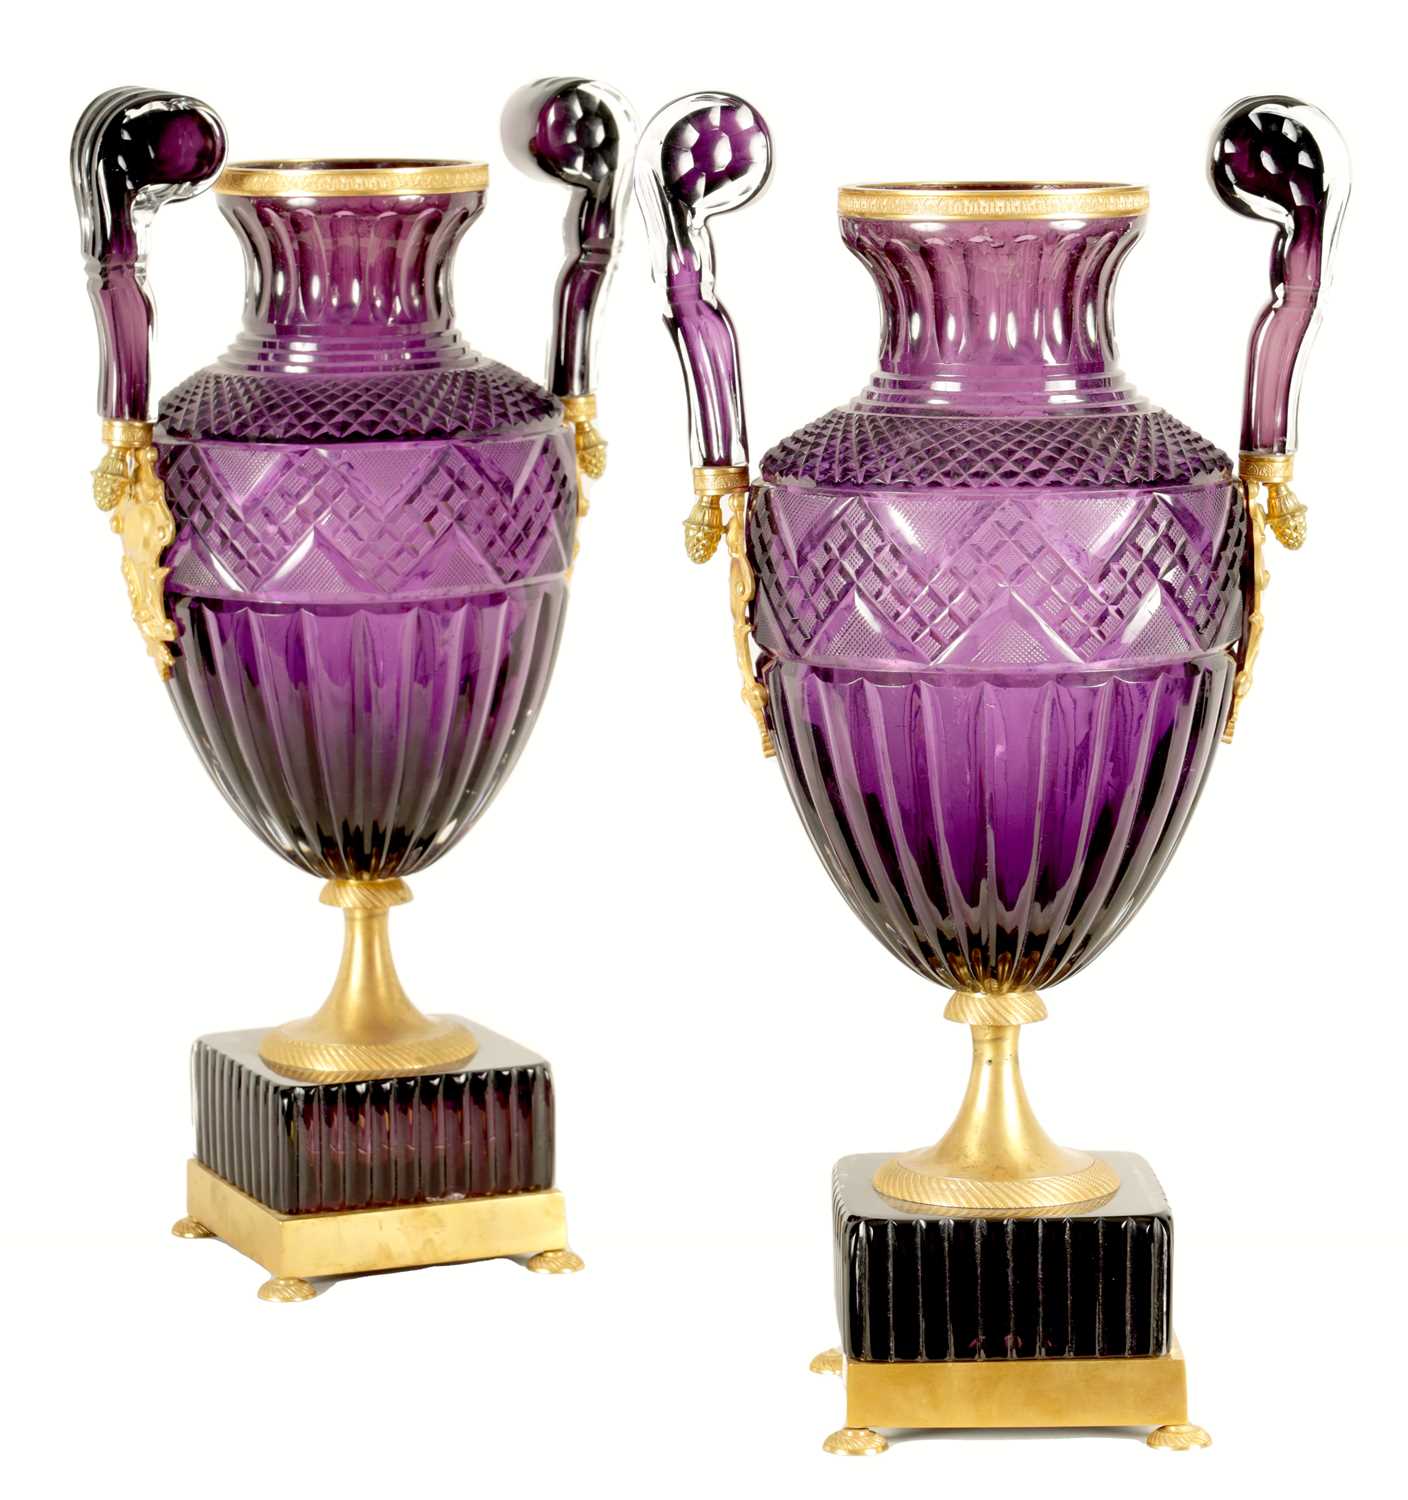 A LARGE PAIR OF LATE 19TH/EARLY 20TH CENTURY RUSSIAN ORMOLU MOUNTED AMETHYST CUT-GLASS - Image 2 of 14